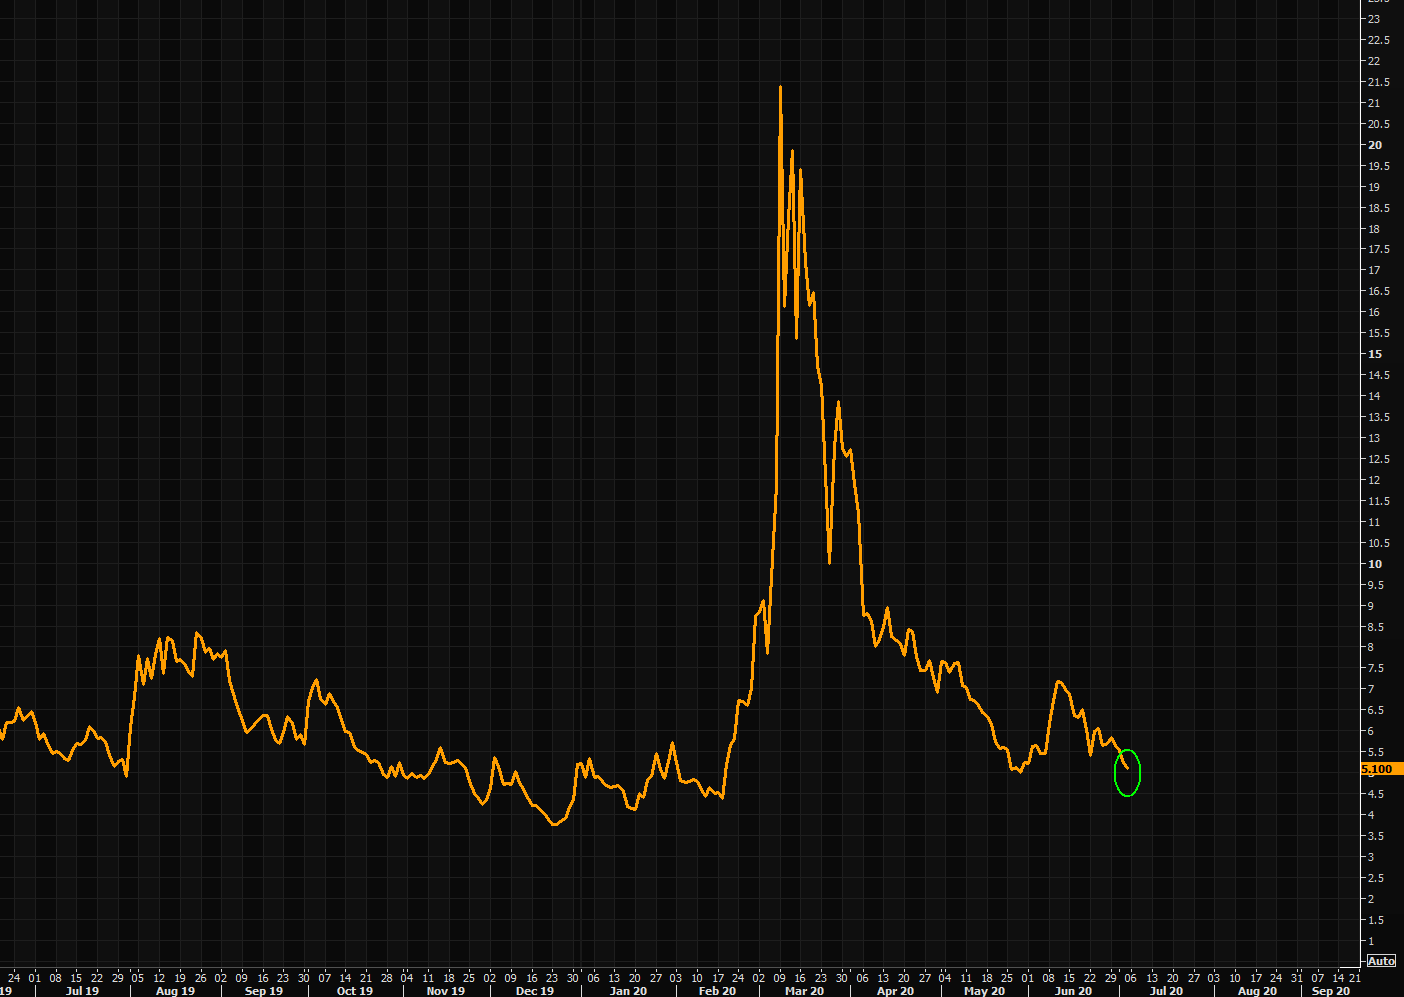 Kill vol - JPY 1 month atm vol approaching recent lows